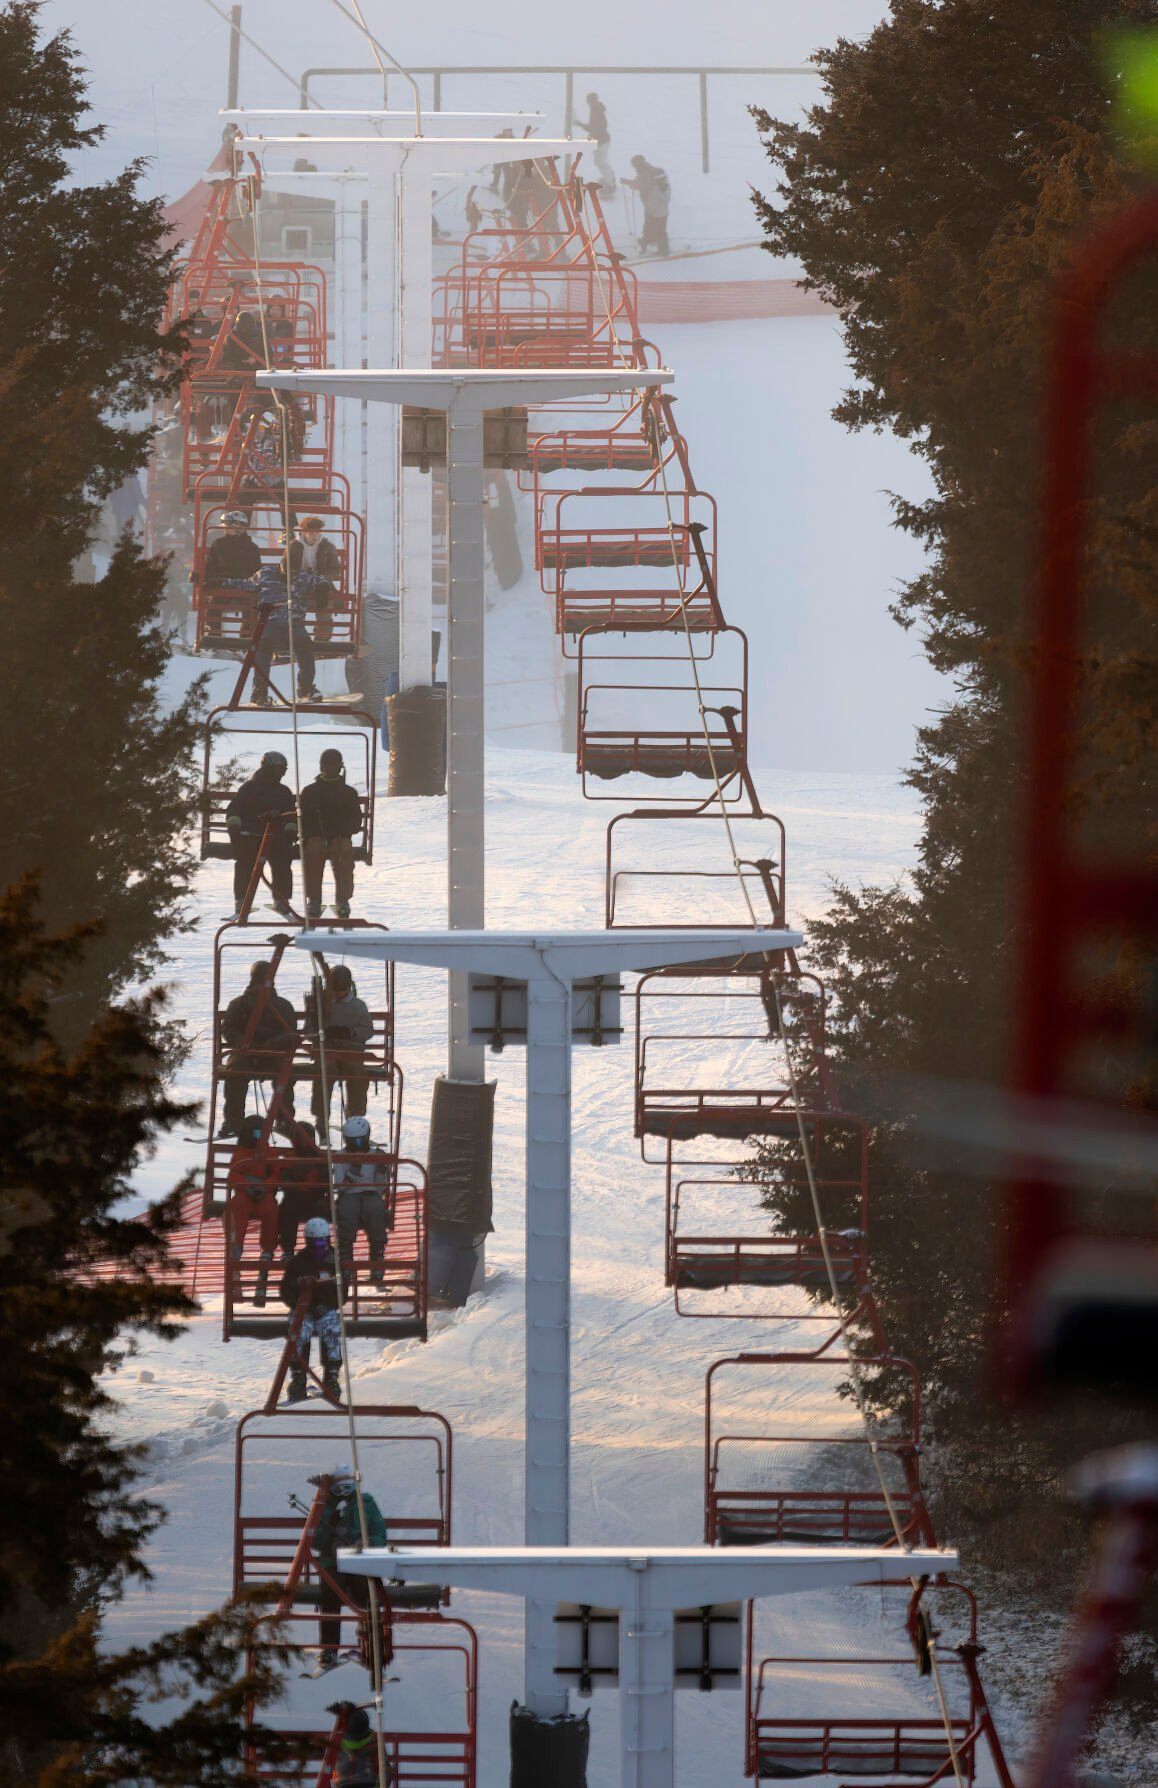 Skiers and snowboarders ride the triple chairlift at Sundown Mountain Resort in Dubuque on Friday, Jan. 6, 2023    PHOTO CREDIT: Stephen Gassman